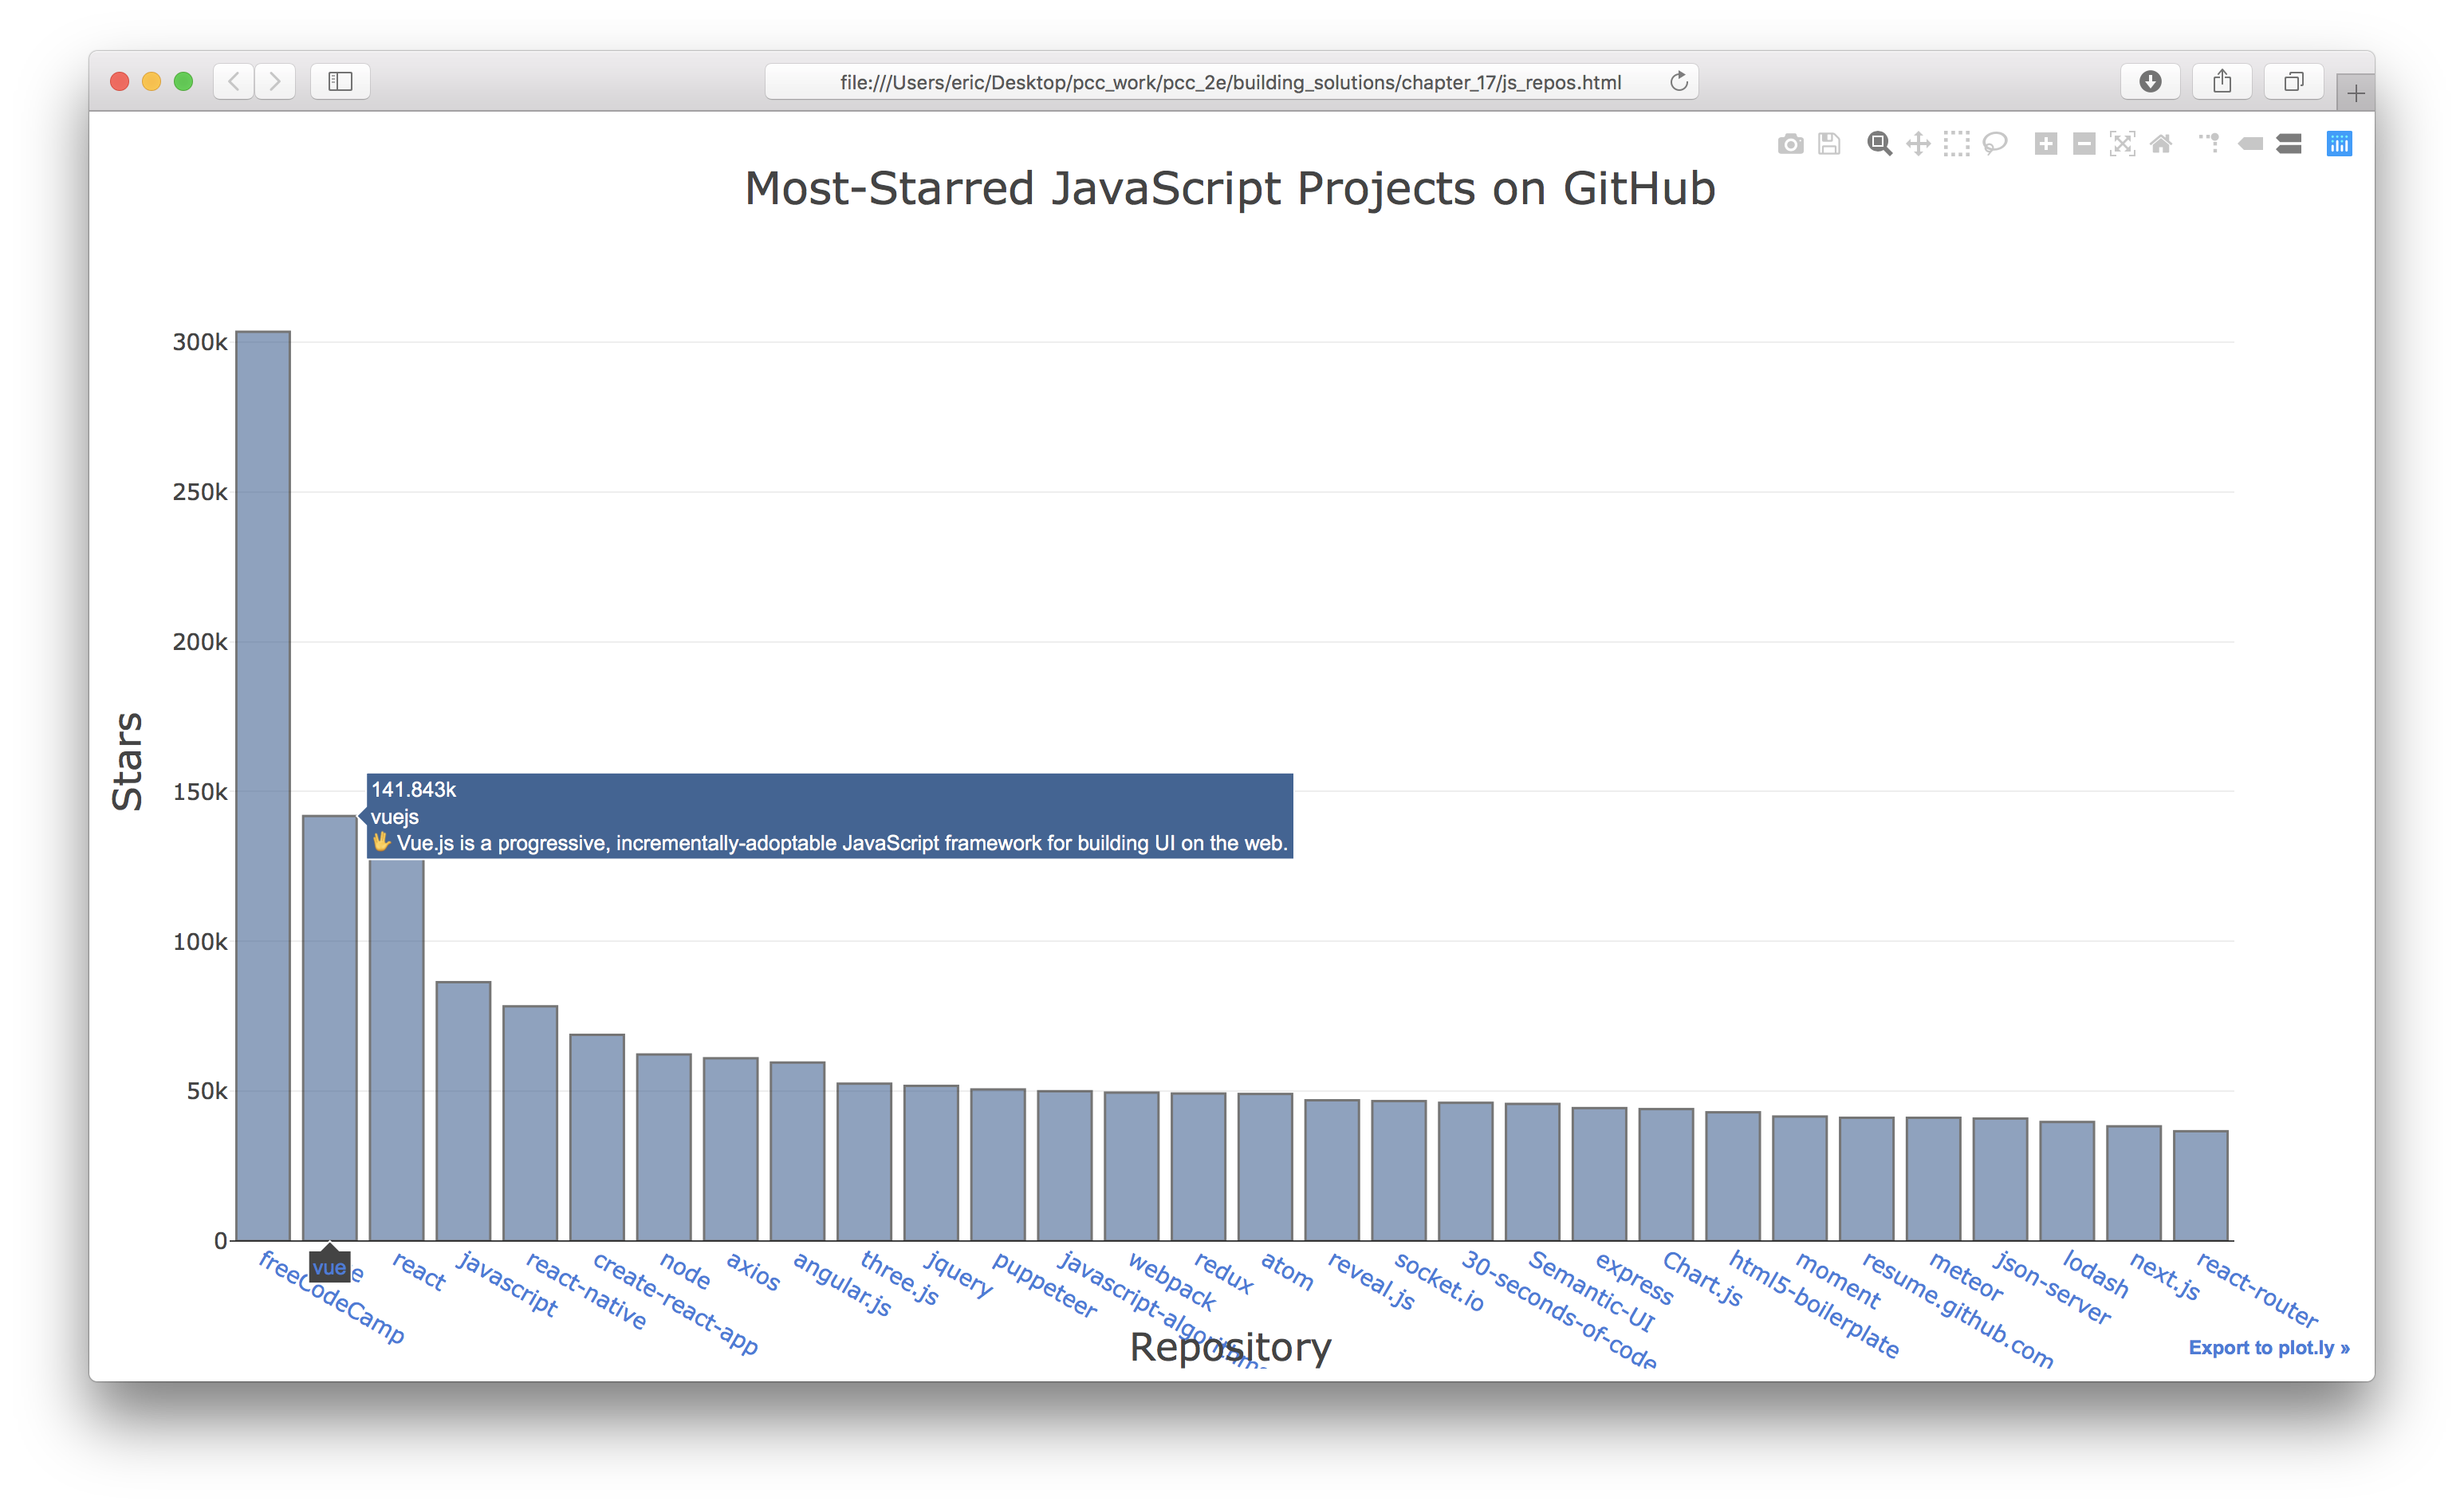 Most popular JavaScript projects on GitHub